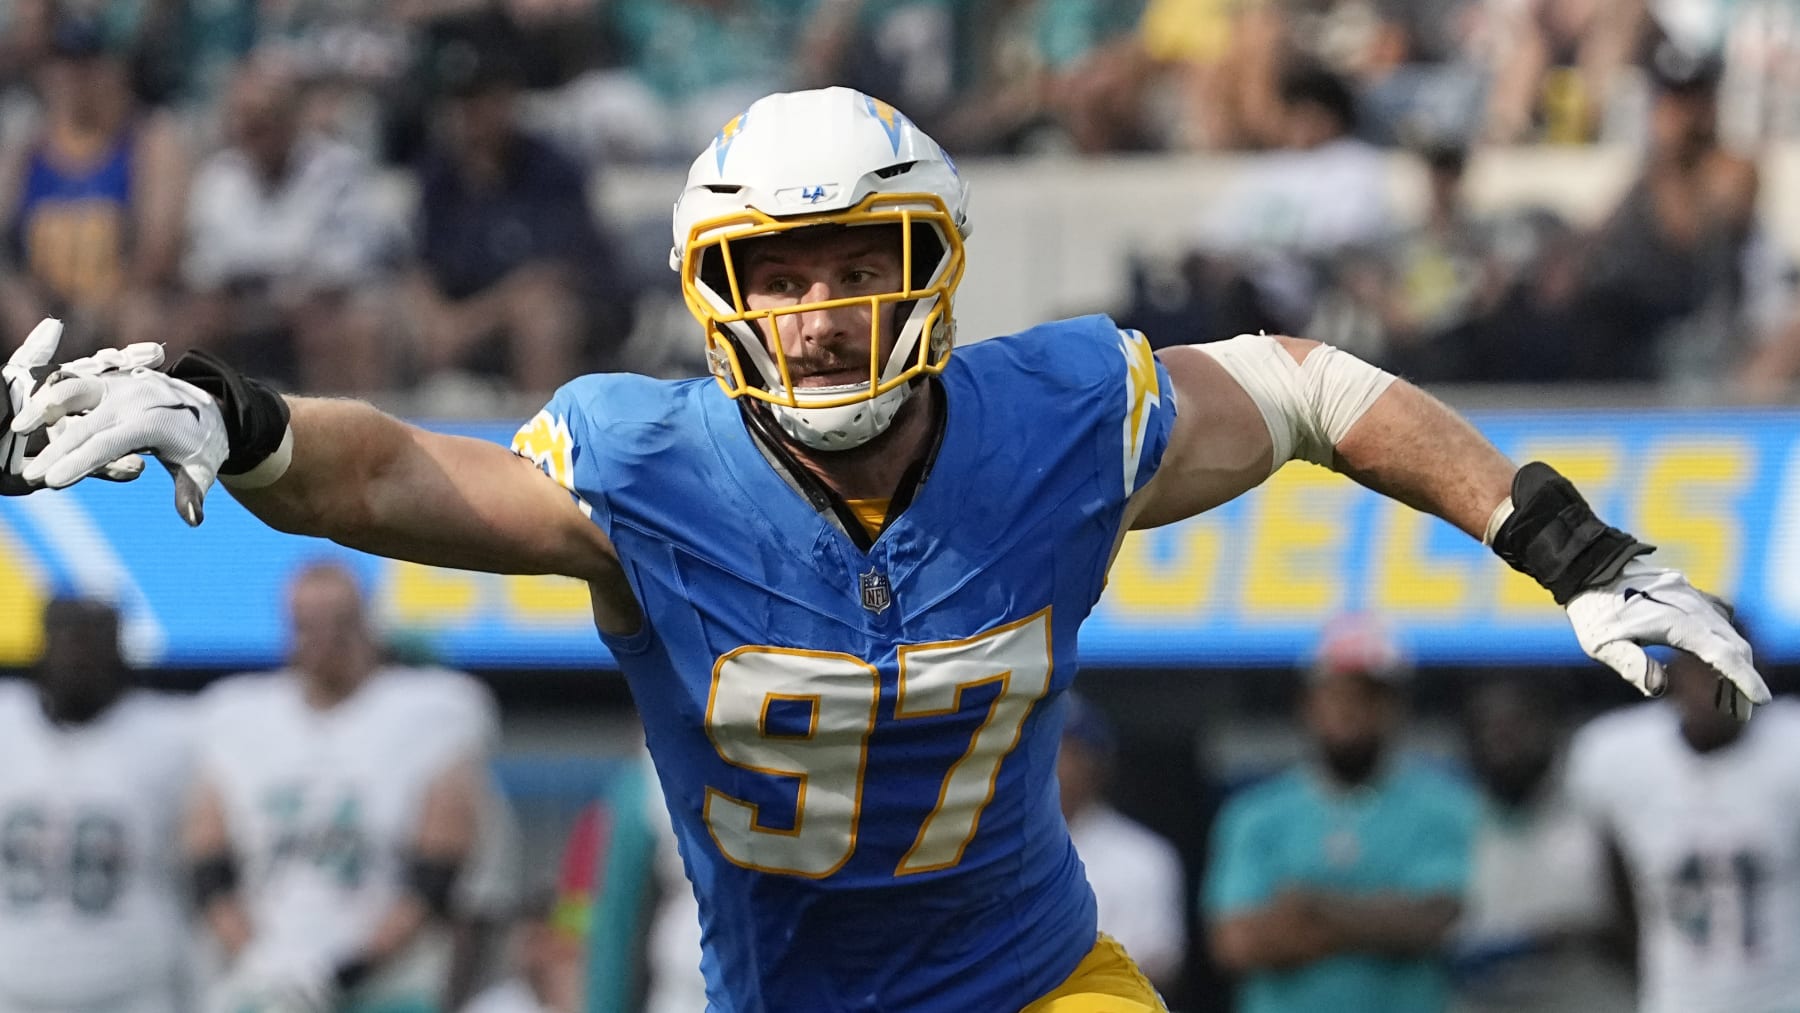 Chargers DE Joey Bosa in win-now mode: 'More than ever, I just